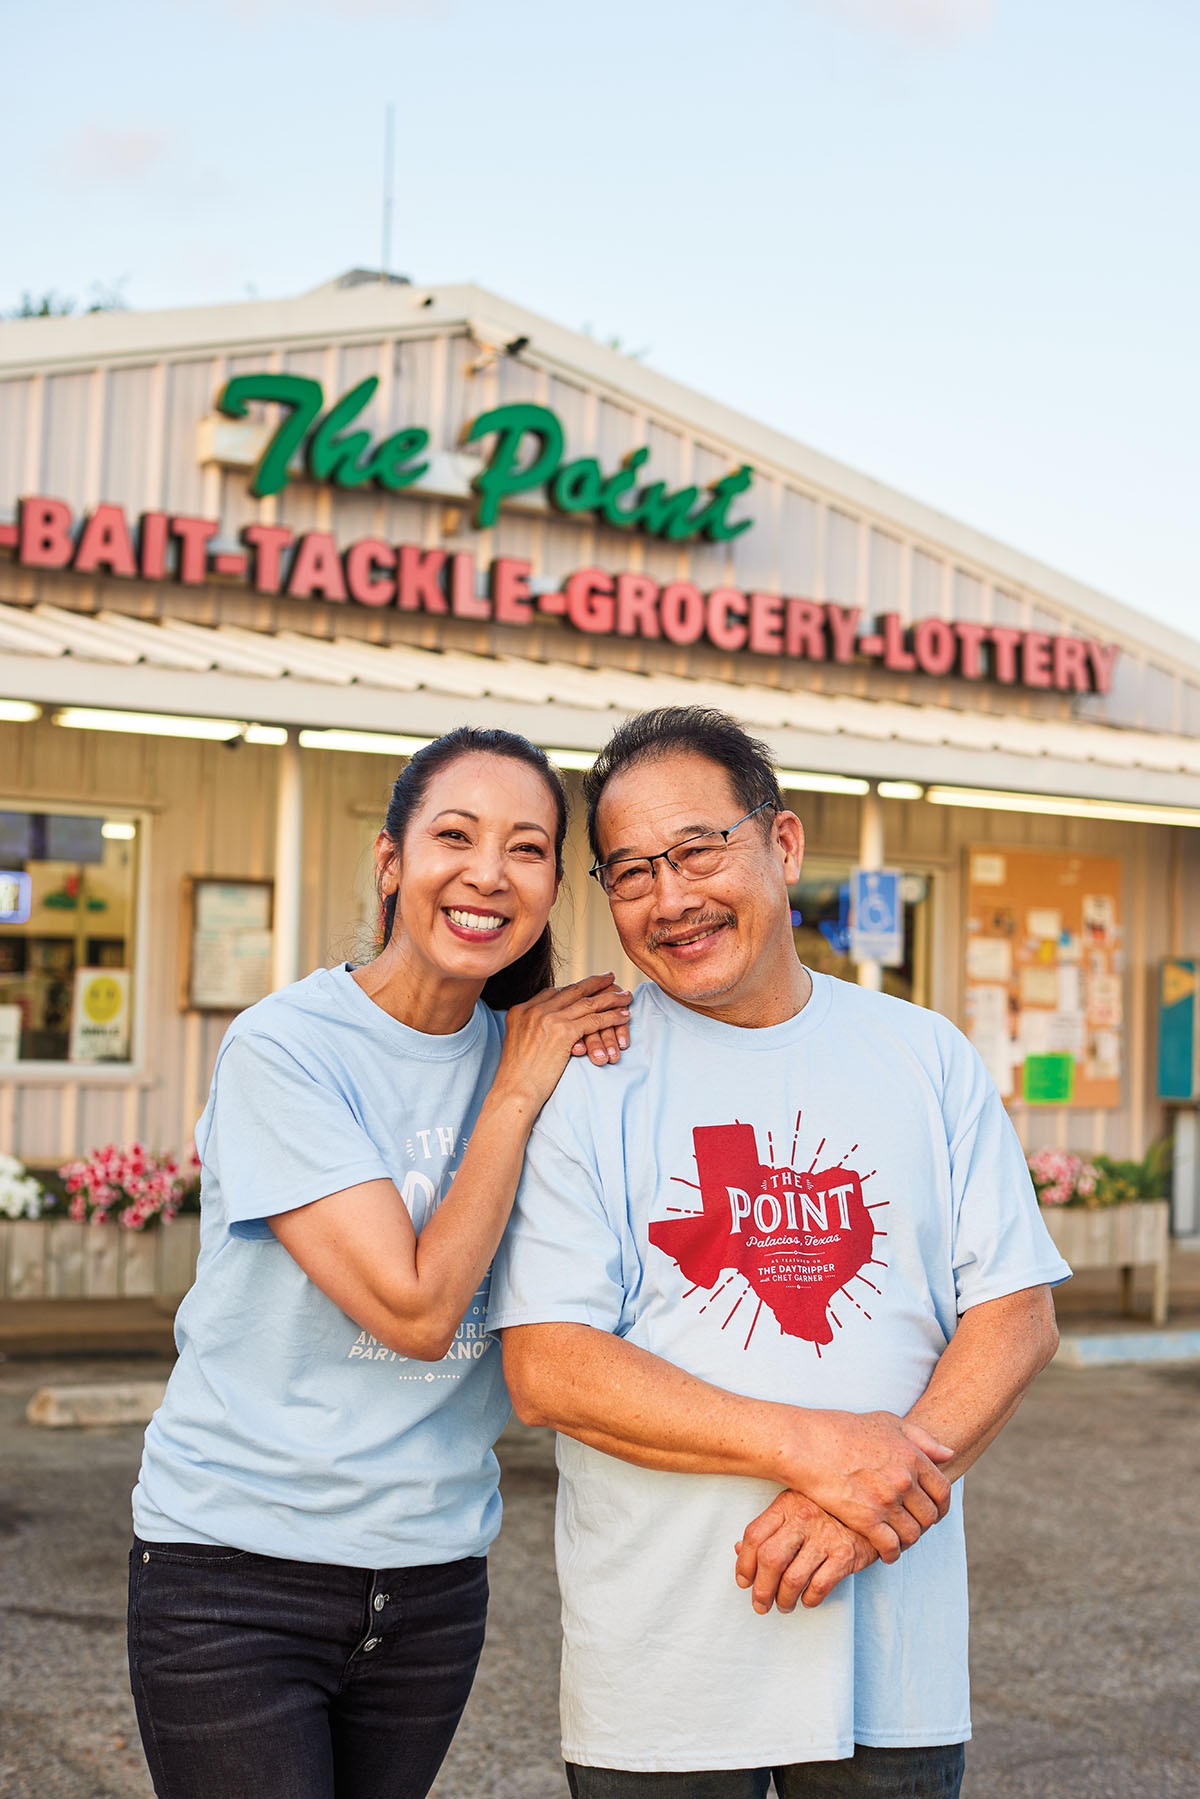 A man and woman stand in light blue t-shirts in front of a store wiwth a sign reading "The Point: Bait, Tackle, Grocery, Lottery"